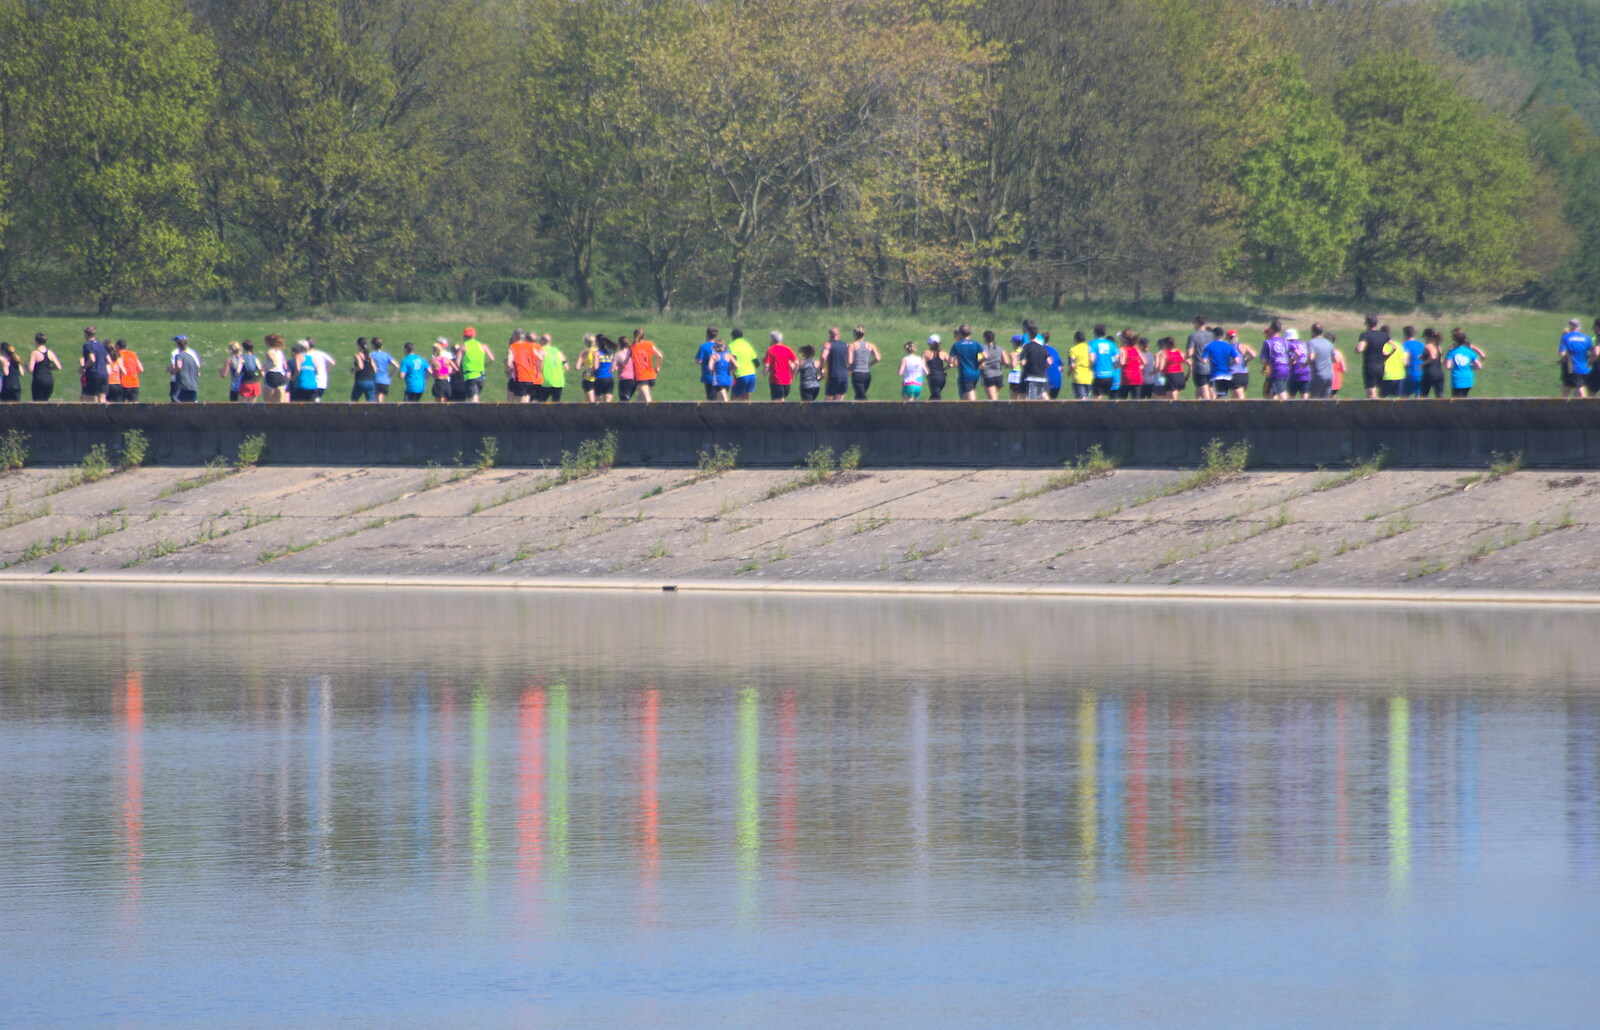 A flourescent barcode is reflected in the water from Isobel's 10km Run, Alton Water, Stutton, Suffolk - 6th May 2018